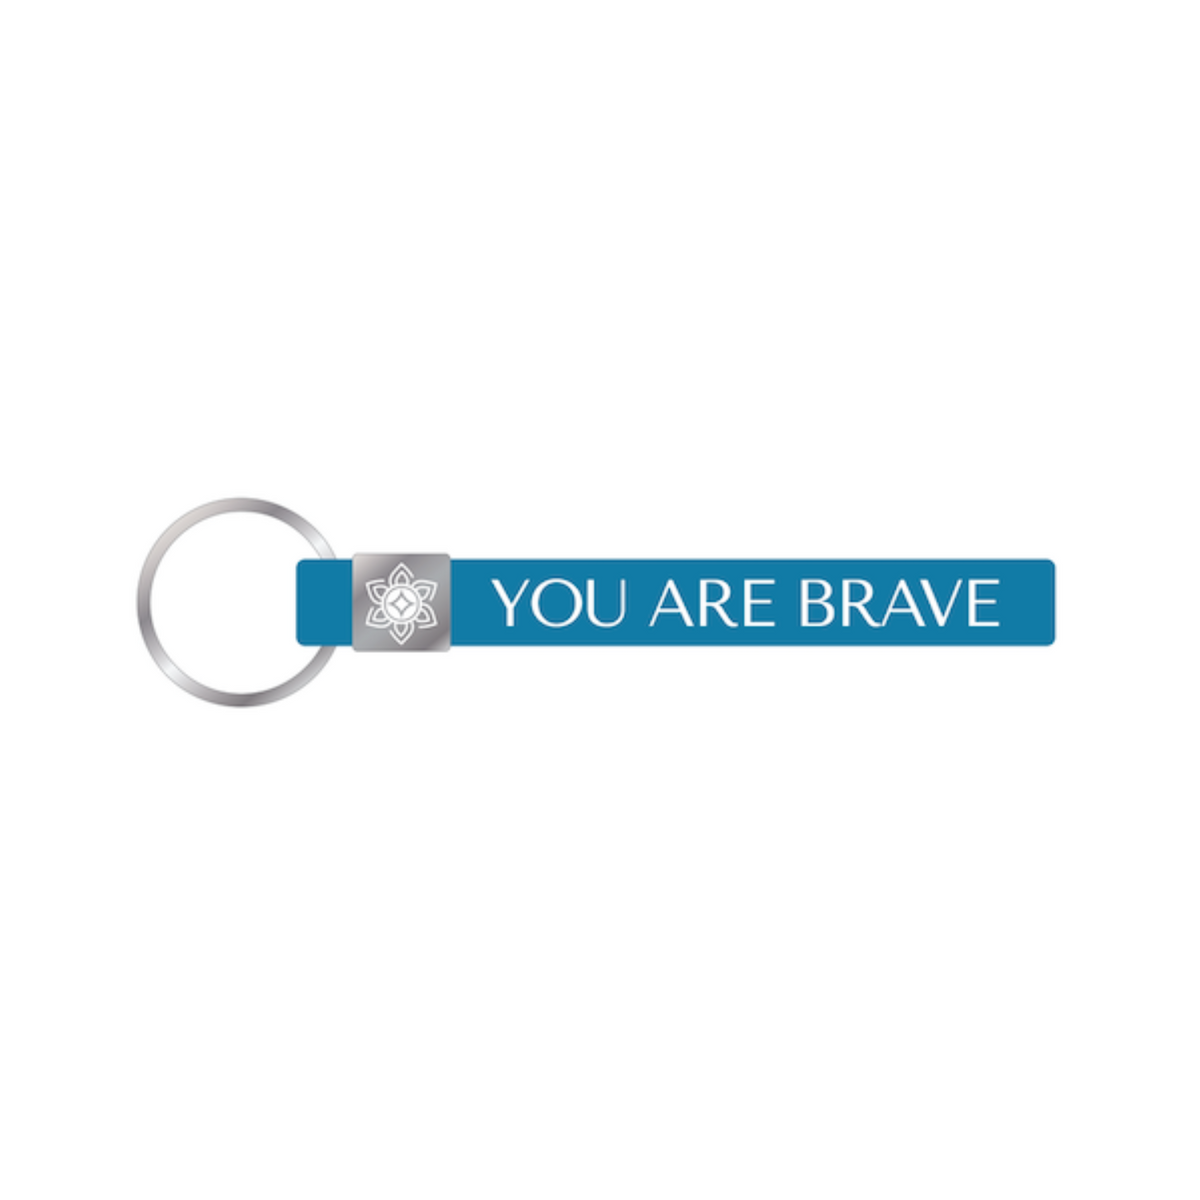 You are Brave (Keychain)